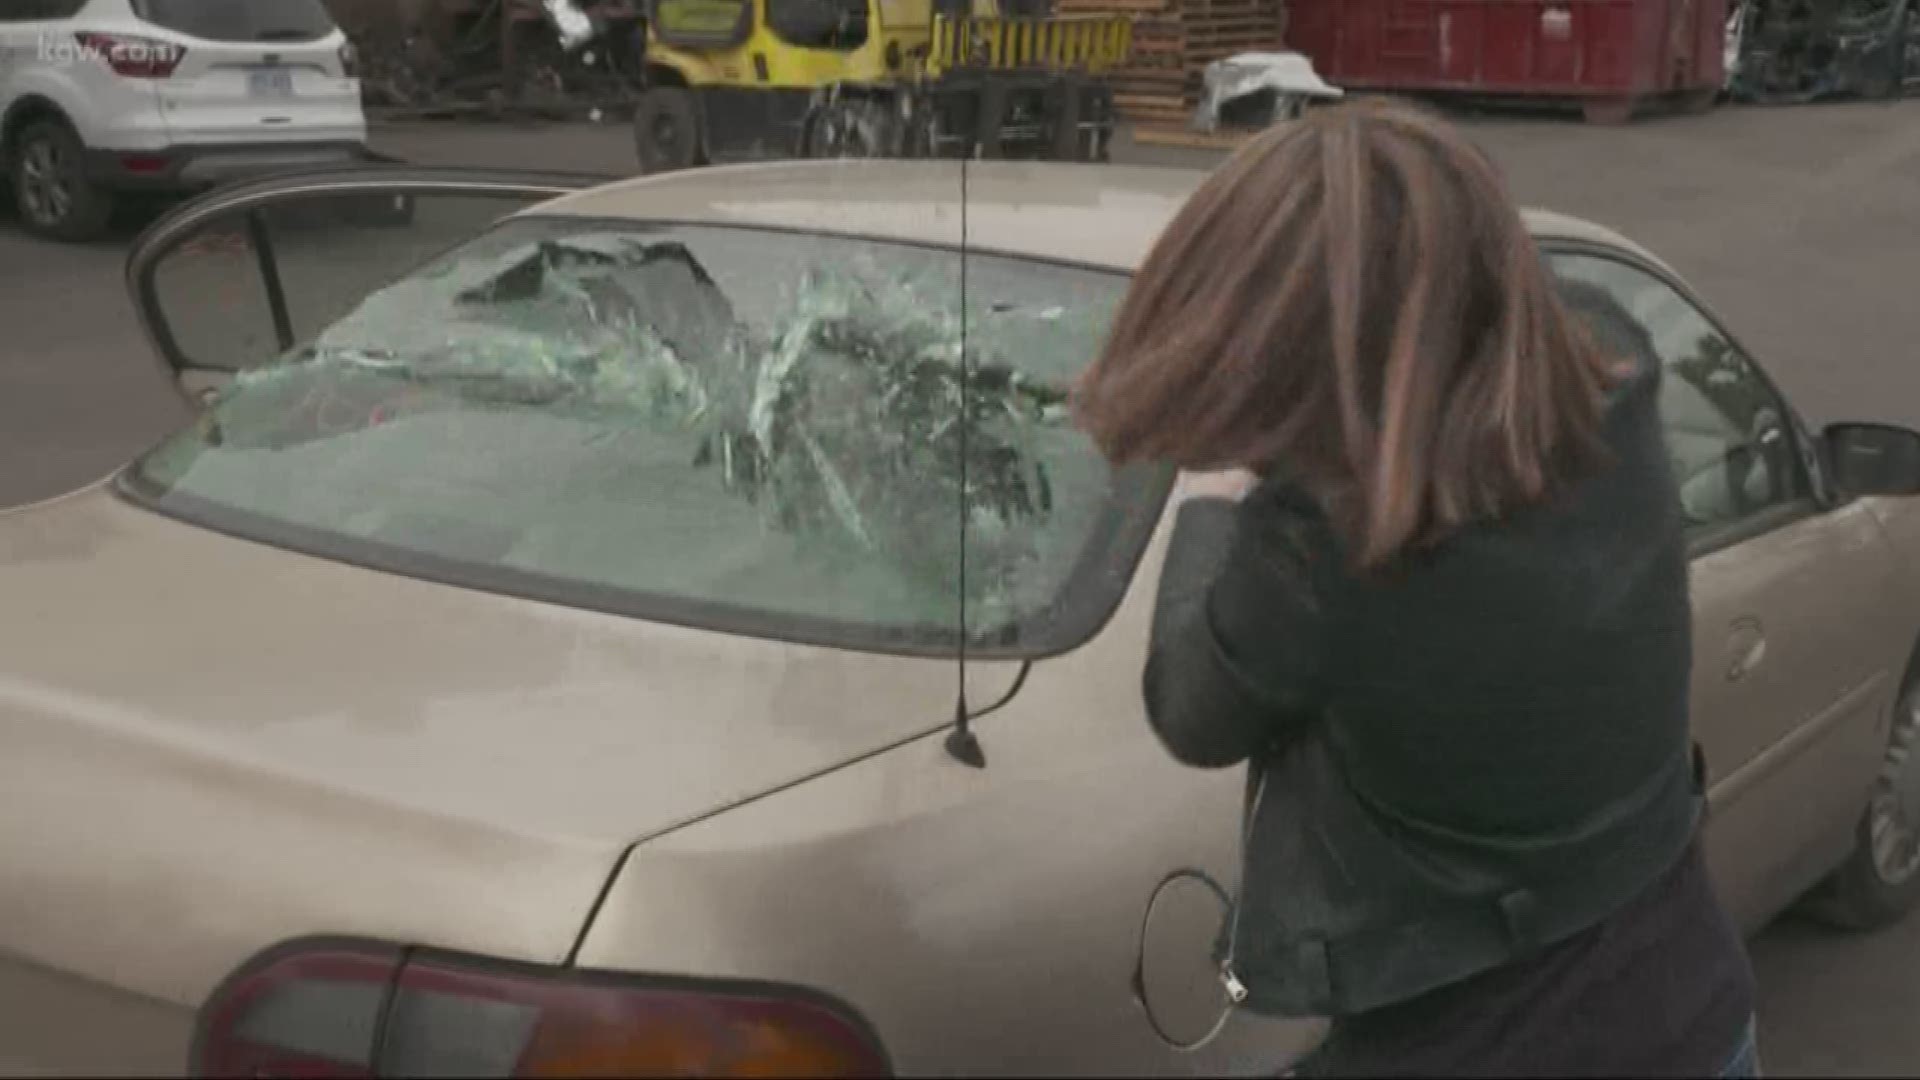 Watch Cassidy Quinn smash a car and recreate Carrie Underwood's 'Before He Cheats' music video

rosequarter.com

#TonighwithCassidy